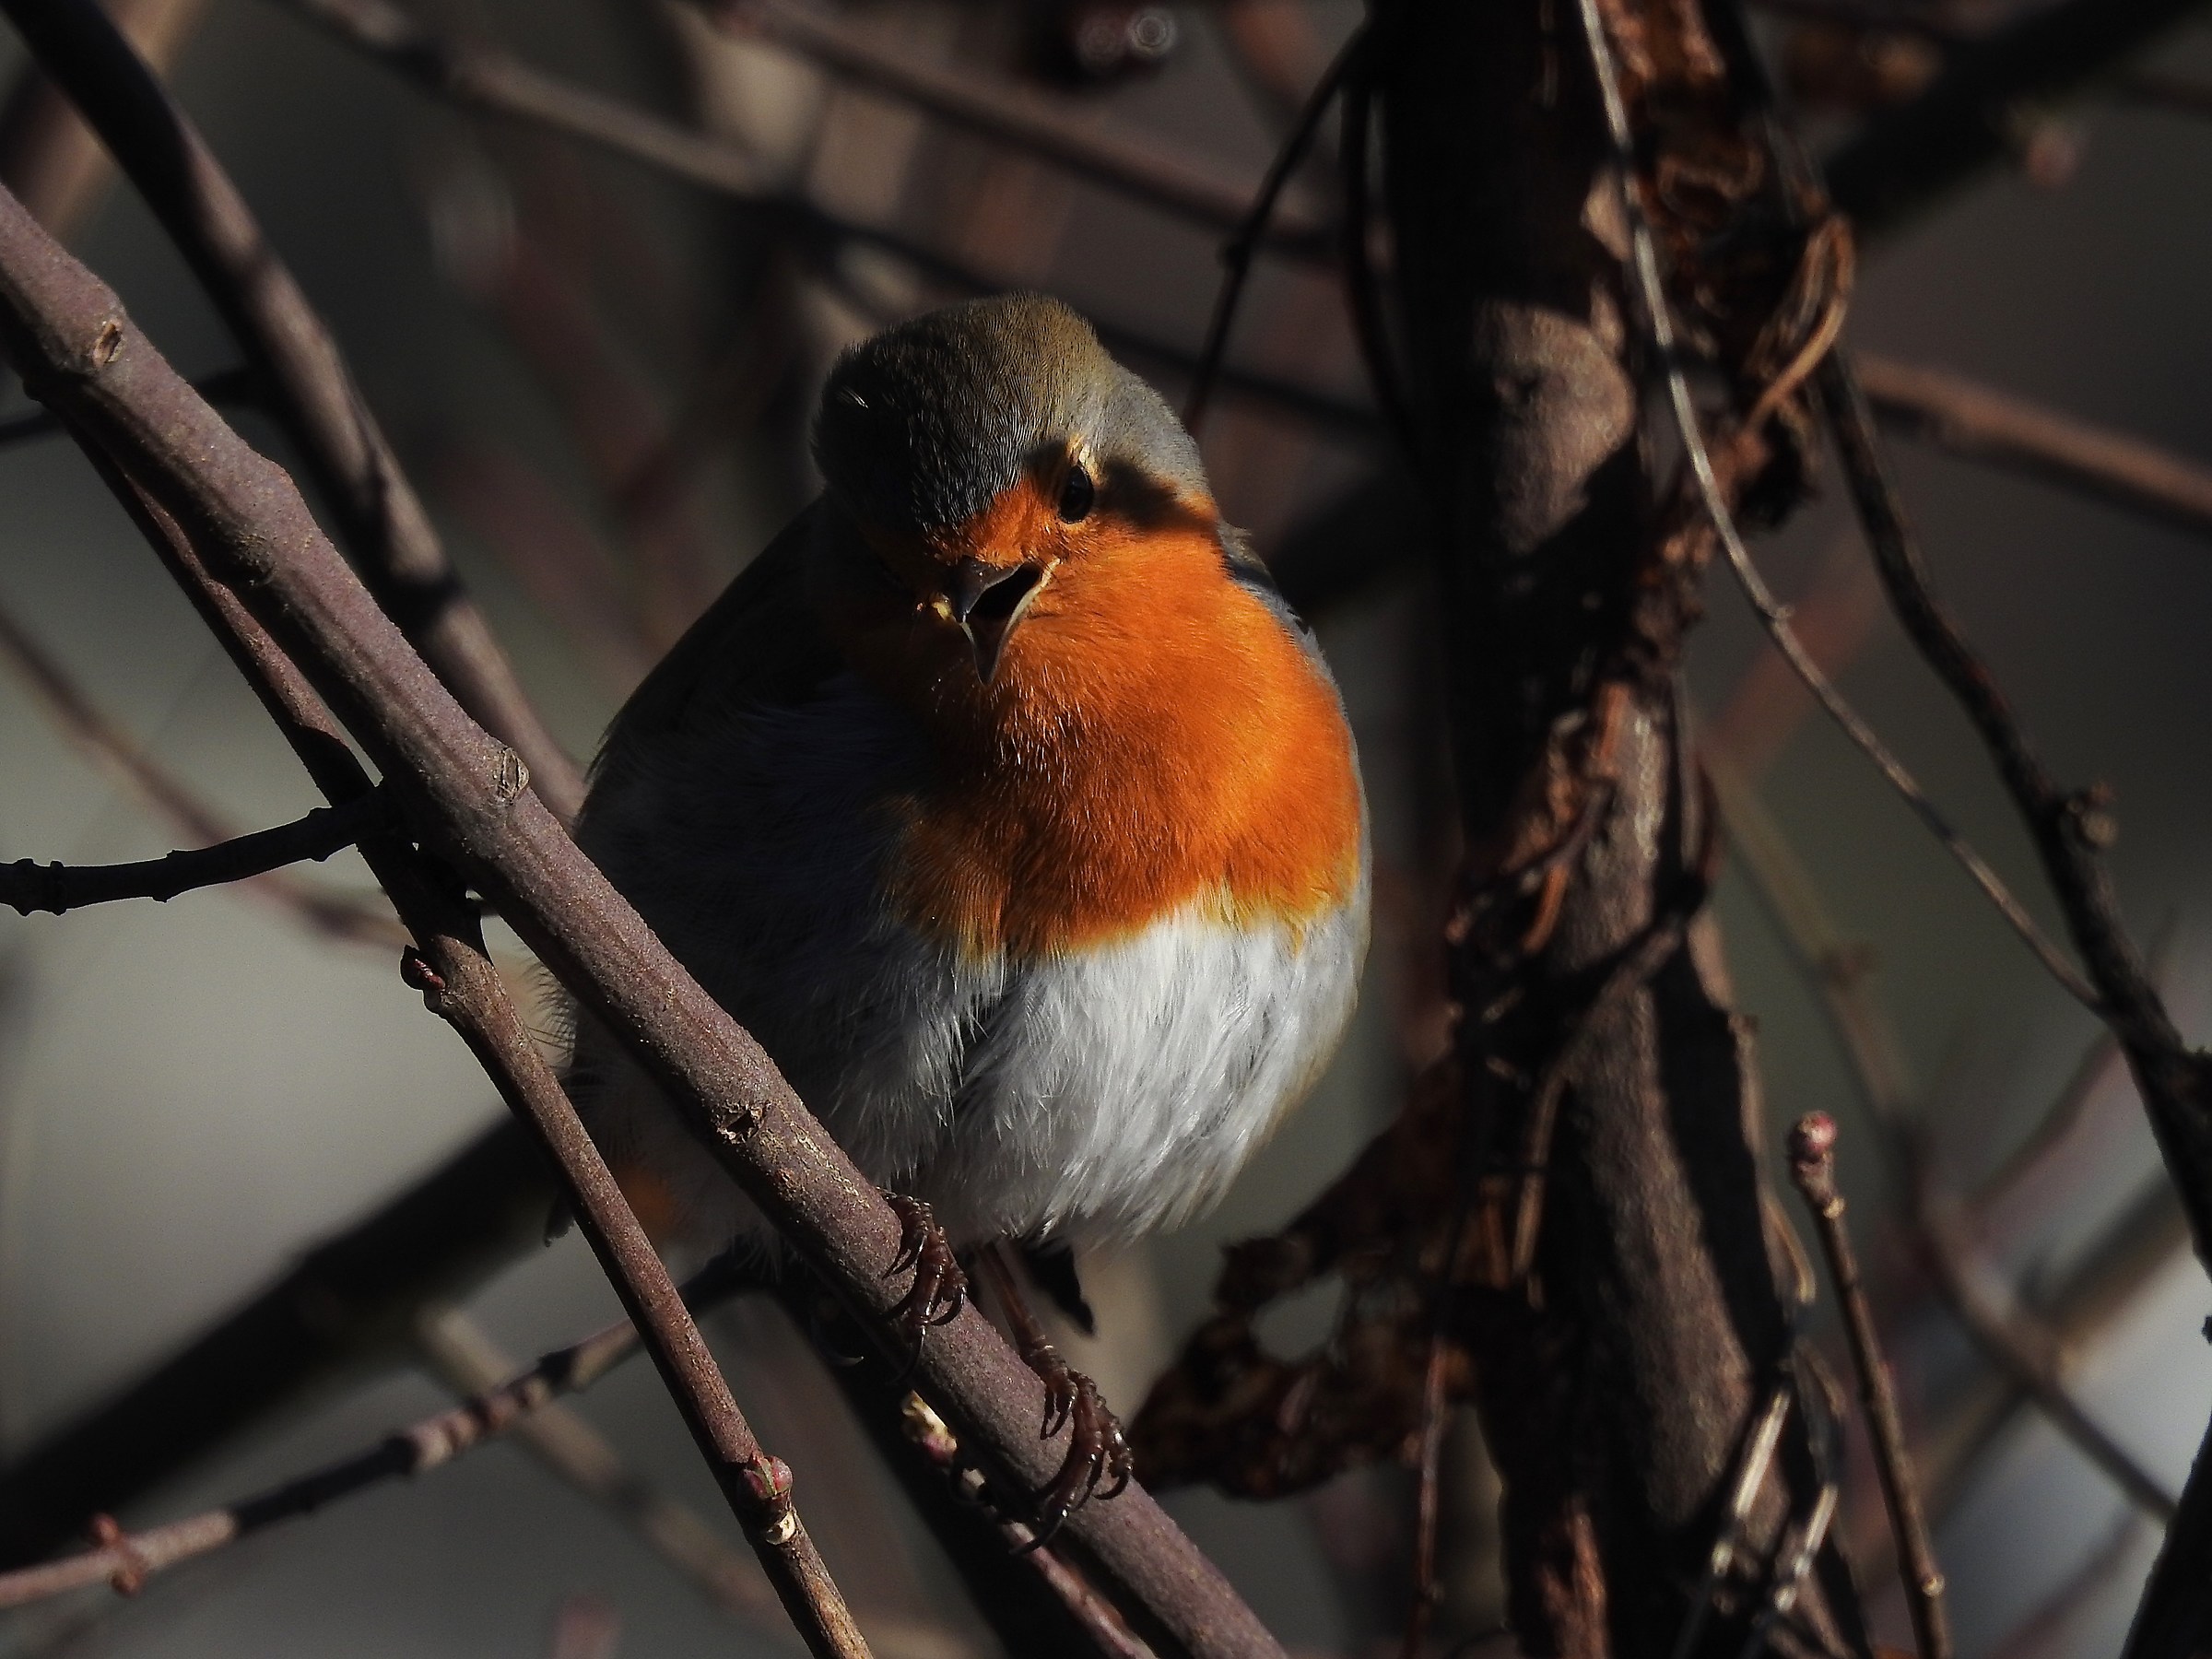 Robin in song...